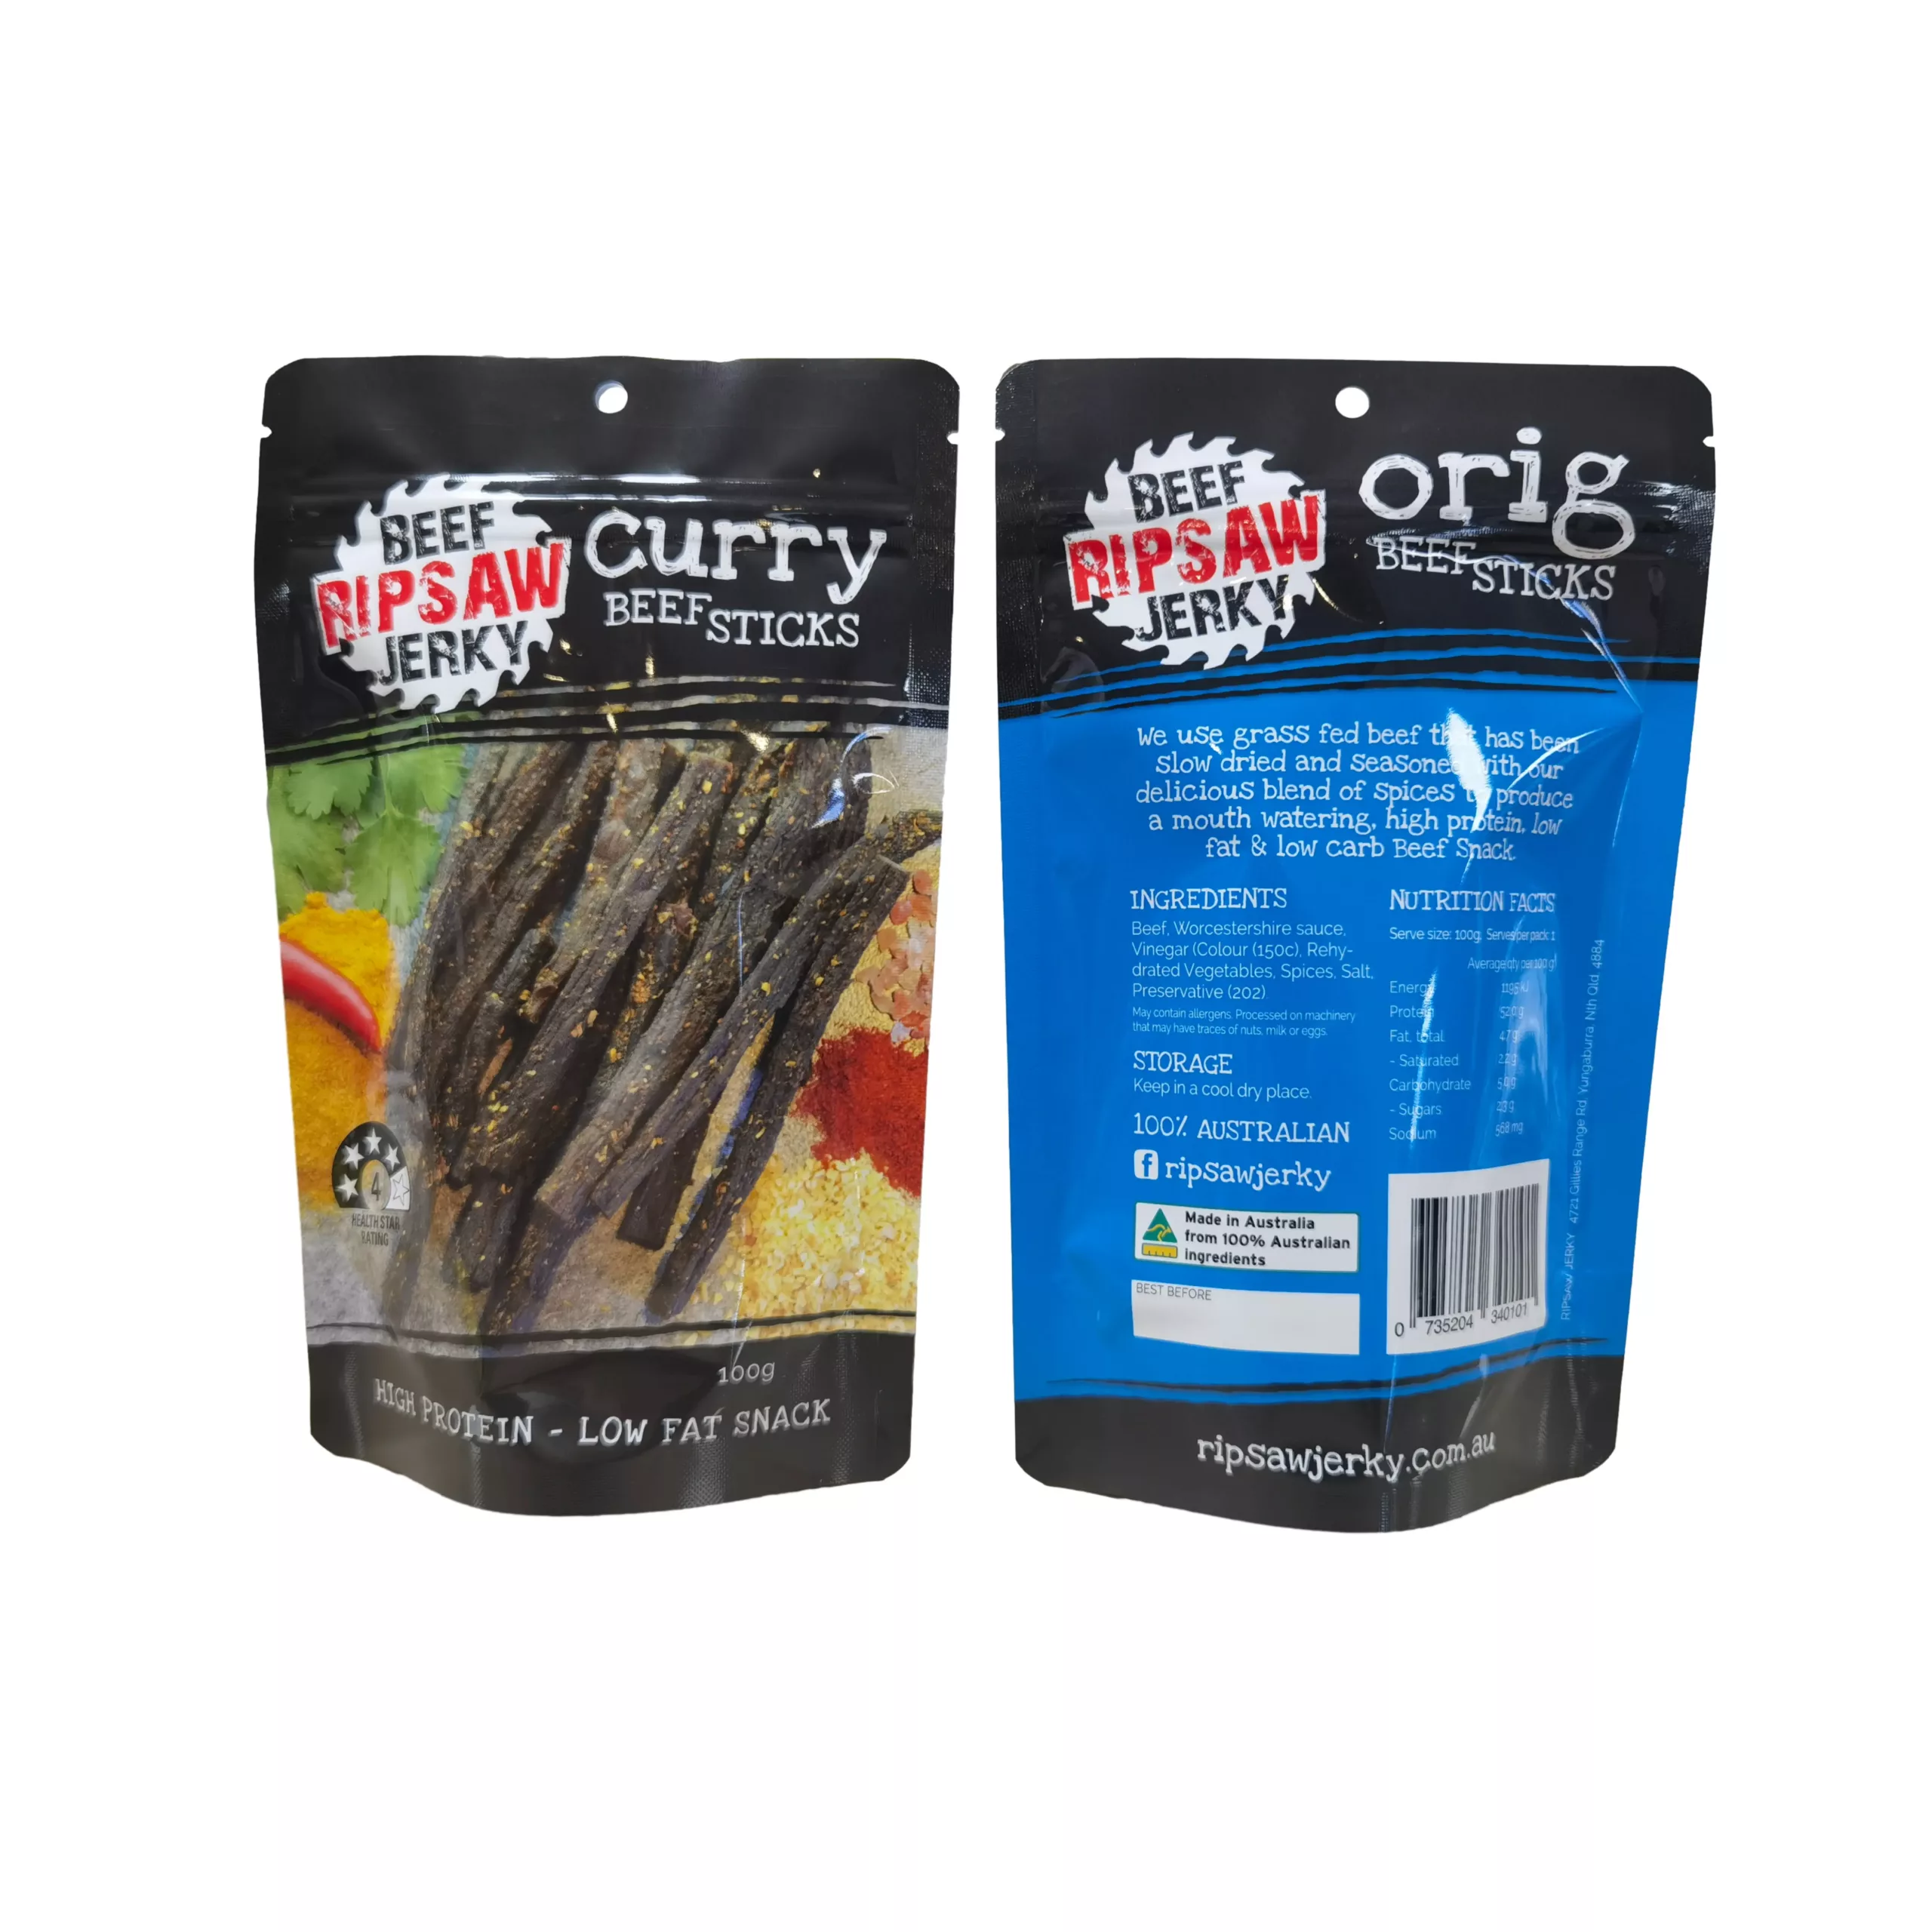 Beef jerky bag front and back display